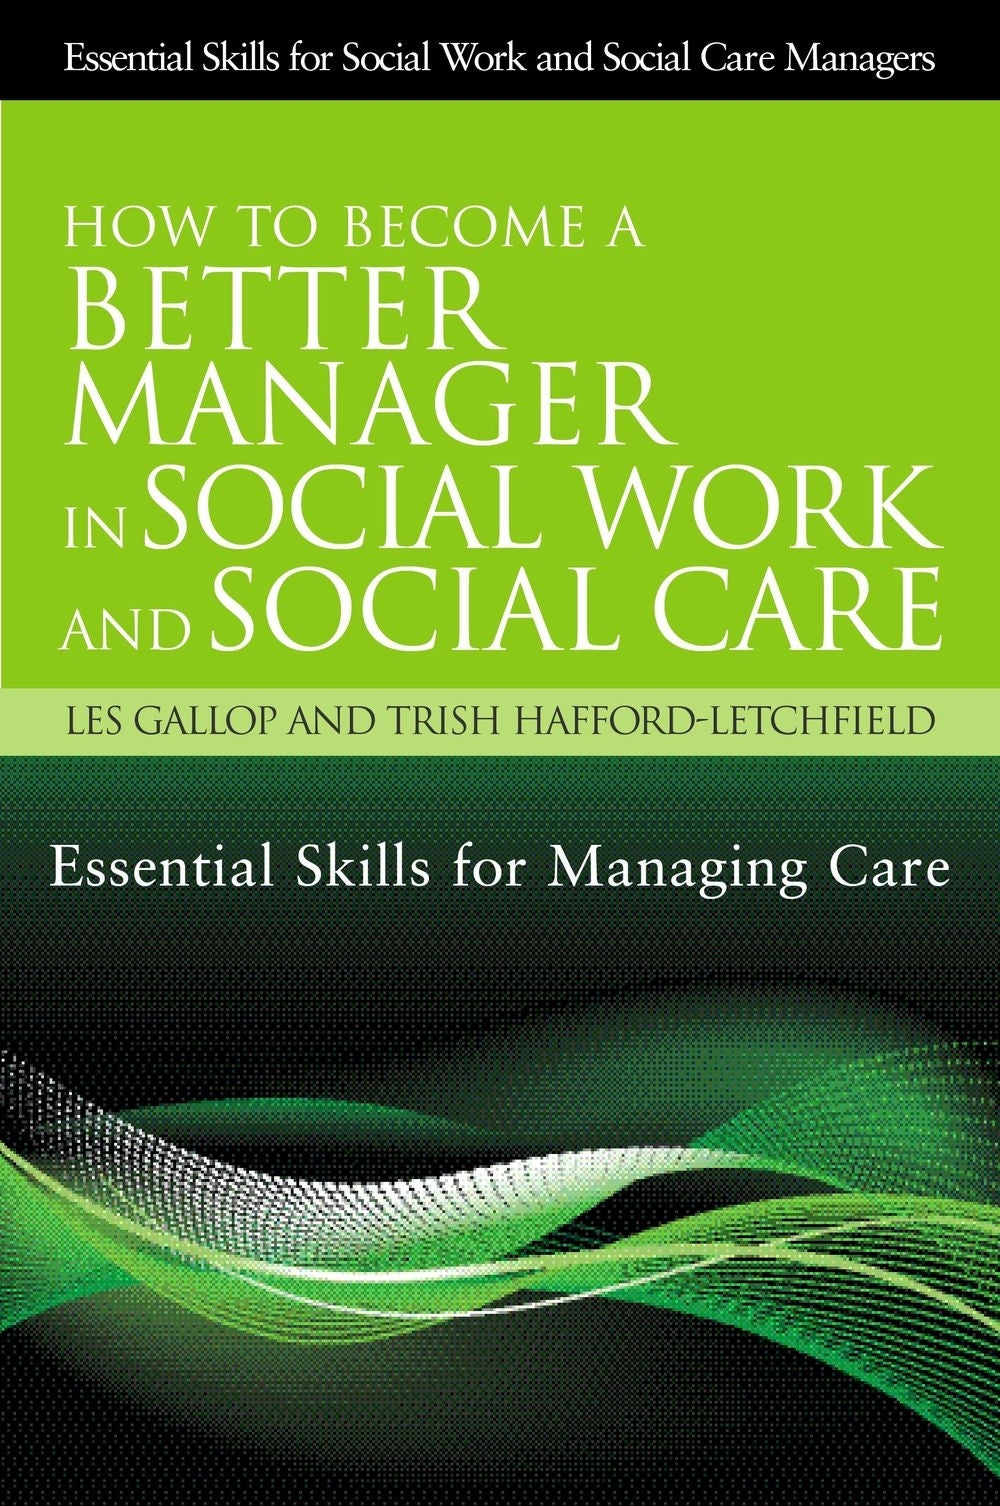 How to Become a Better Manager in Social Work and Social Care by Trish Hafford-Letchfield, Trish Hafford-Letchfield, Les Gallop